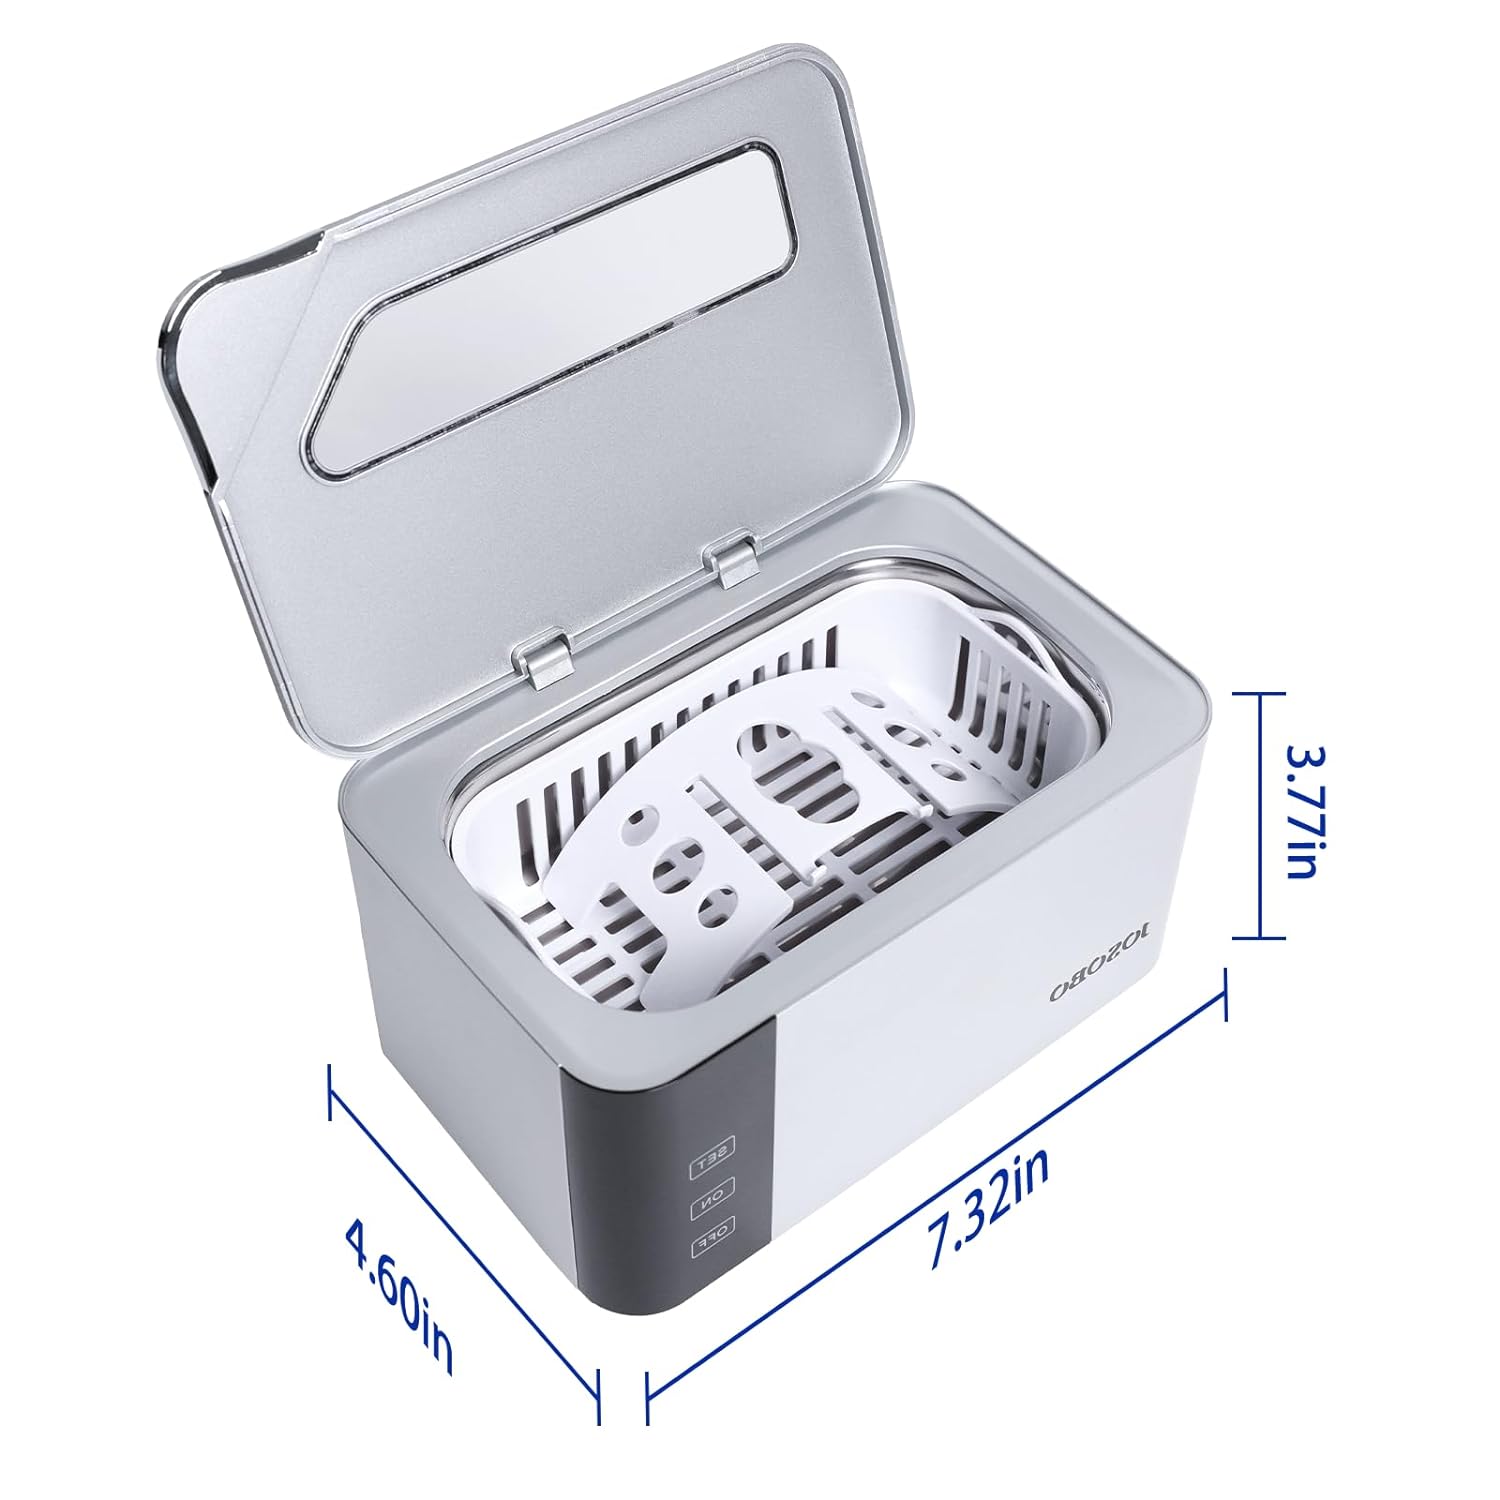 Ultrasonic Jewelry Cleaner, Ultrasonic Cleaner Machine with Digital Timer and 304 Stainless Steel Tank